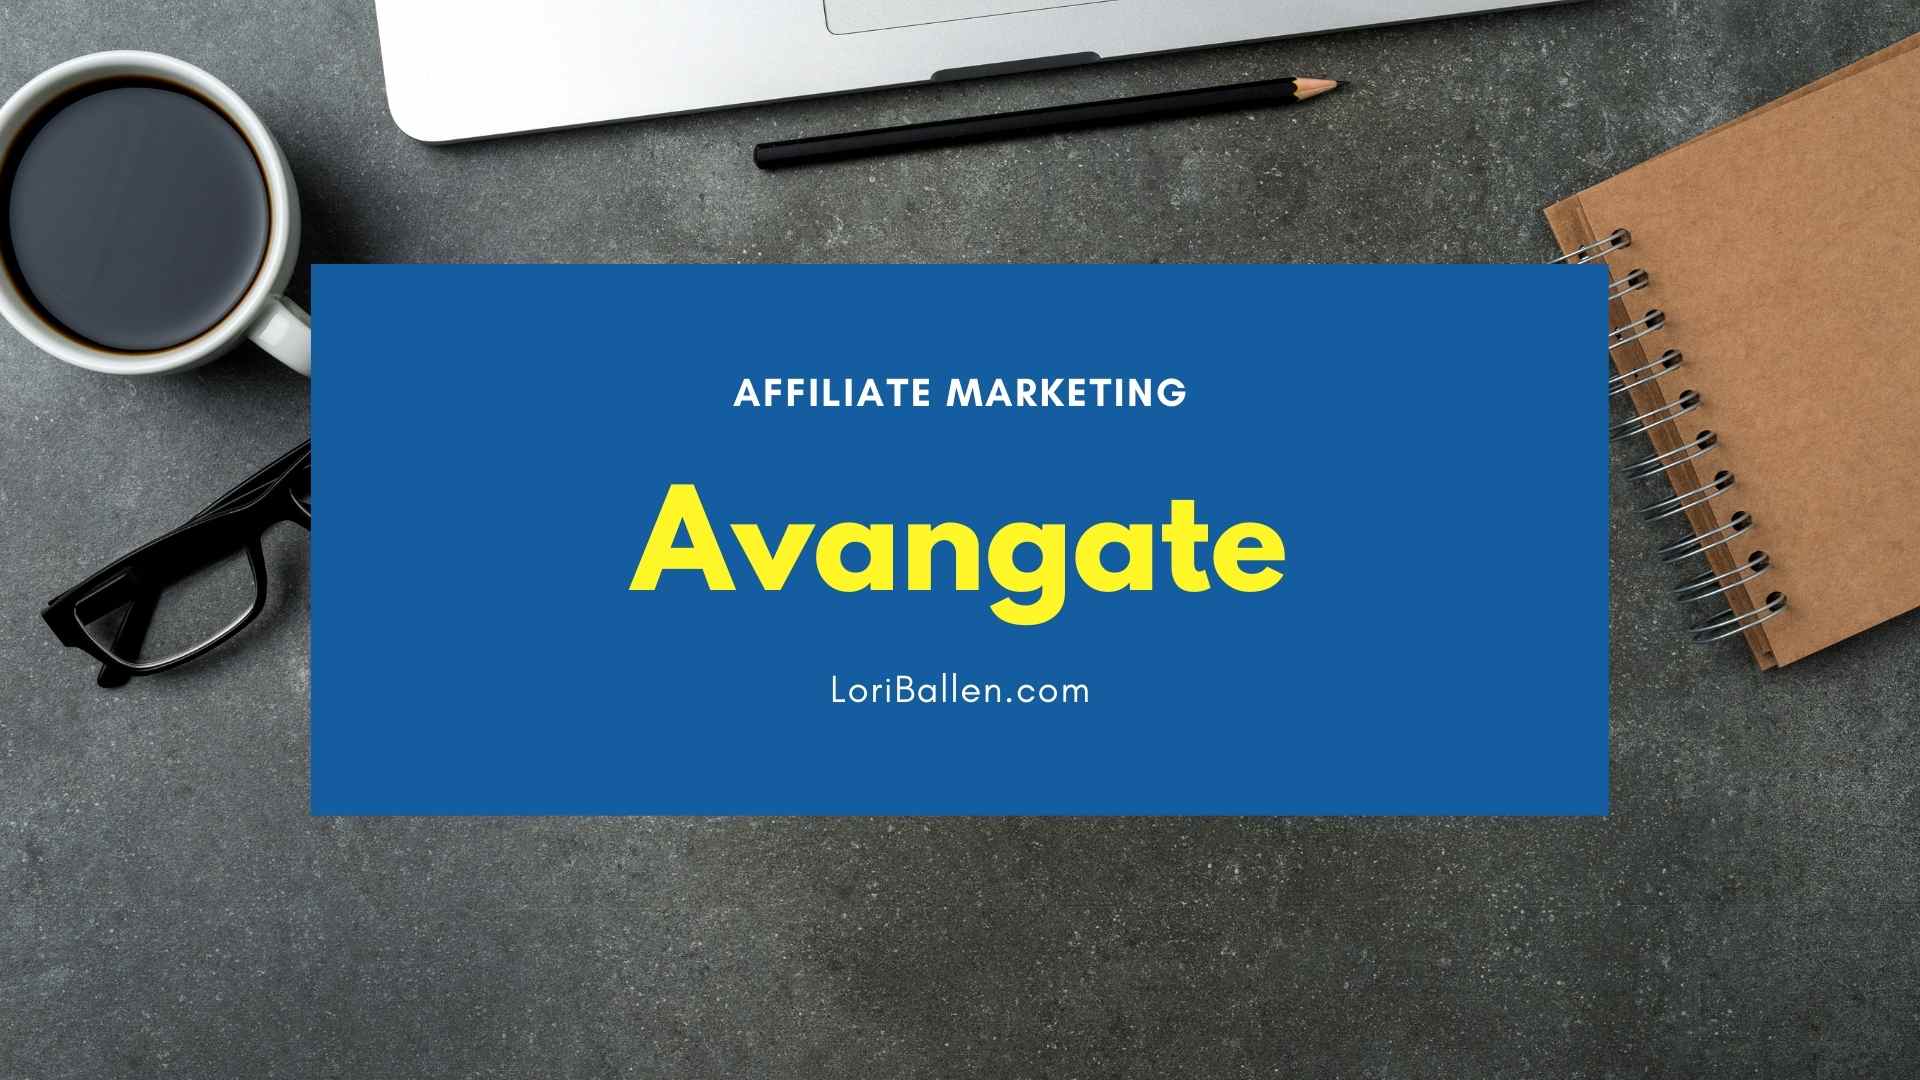 If you're looking for an alternative to Clickbank, Avangate may be a good option for you. Here's a look at some of the reasons why Avangate makes the list of affiliate networks: